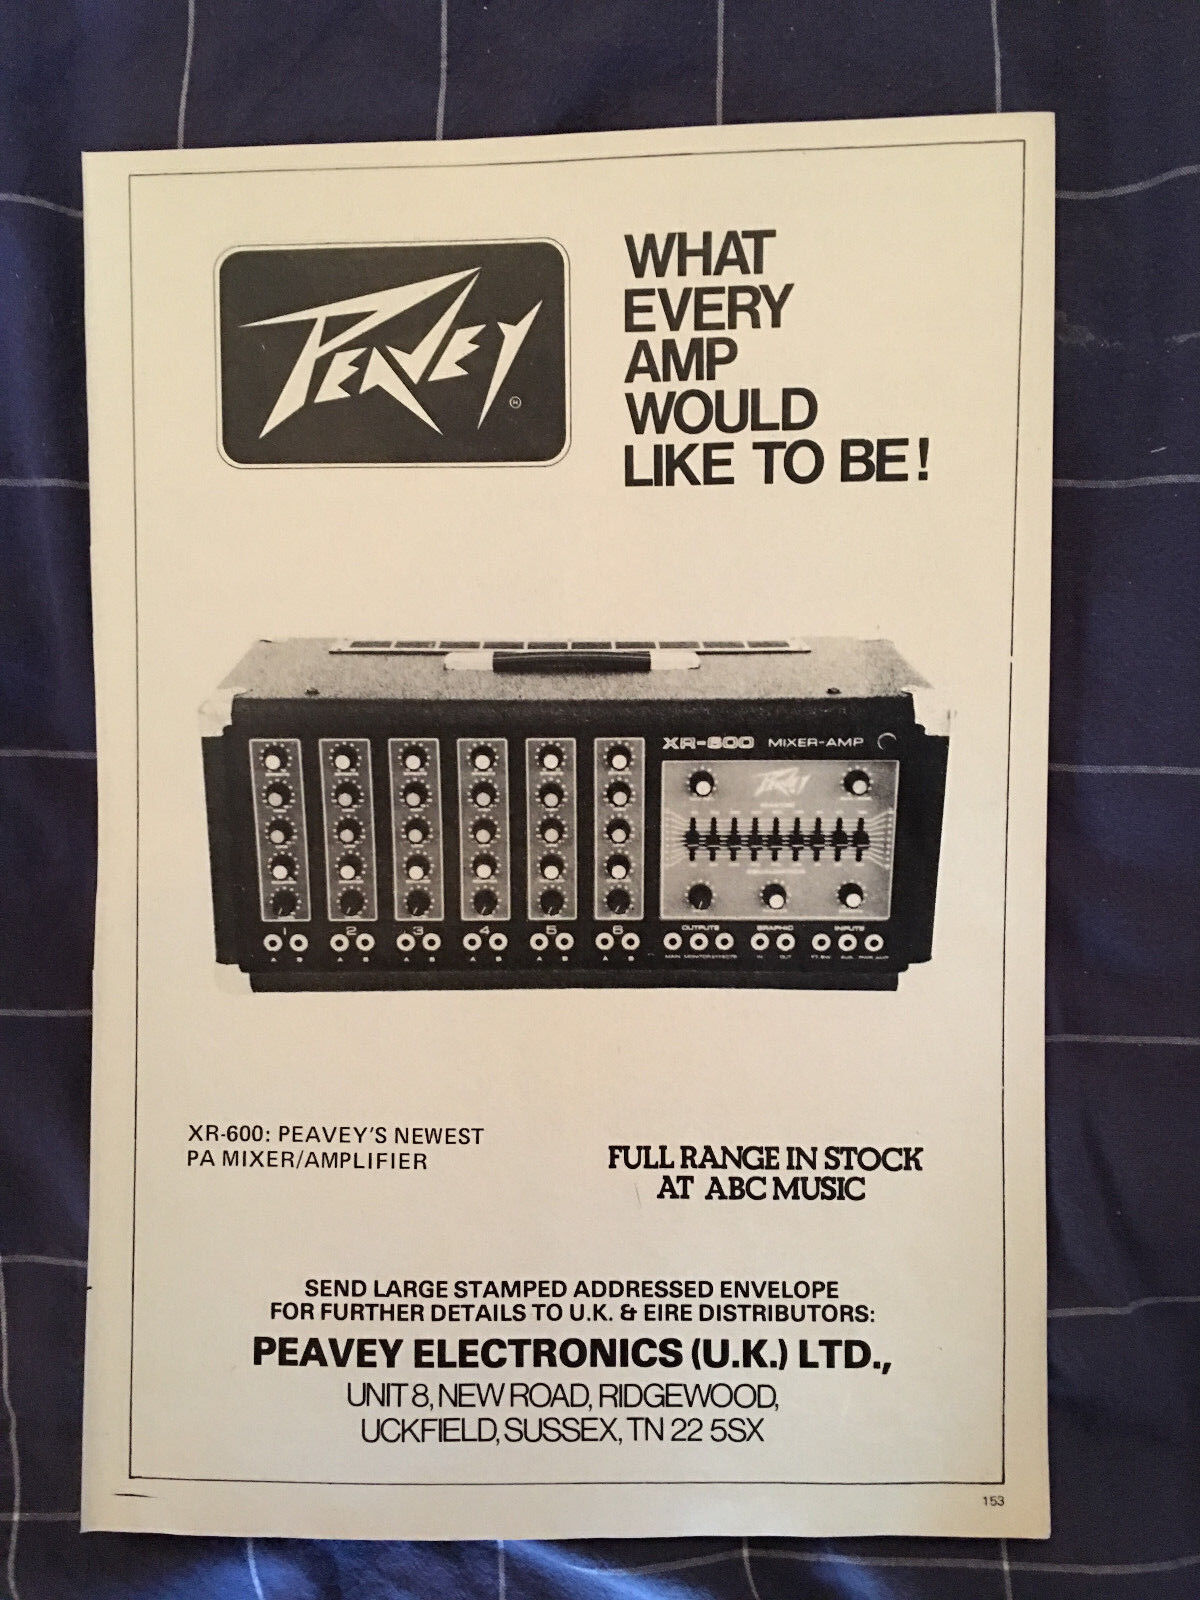 PEAVEY XR-600 AMP - ORIGINAL 1978 1 PAGE PICTURE A4 ADVERT - CLIPPING/CUTTING